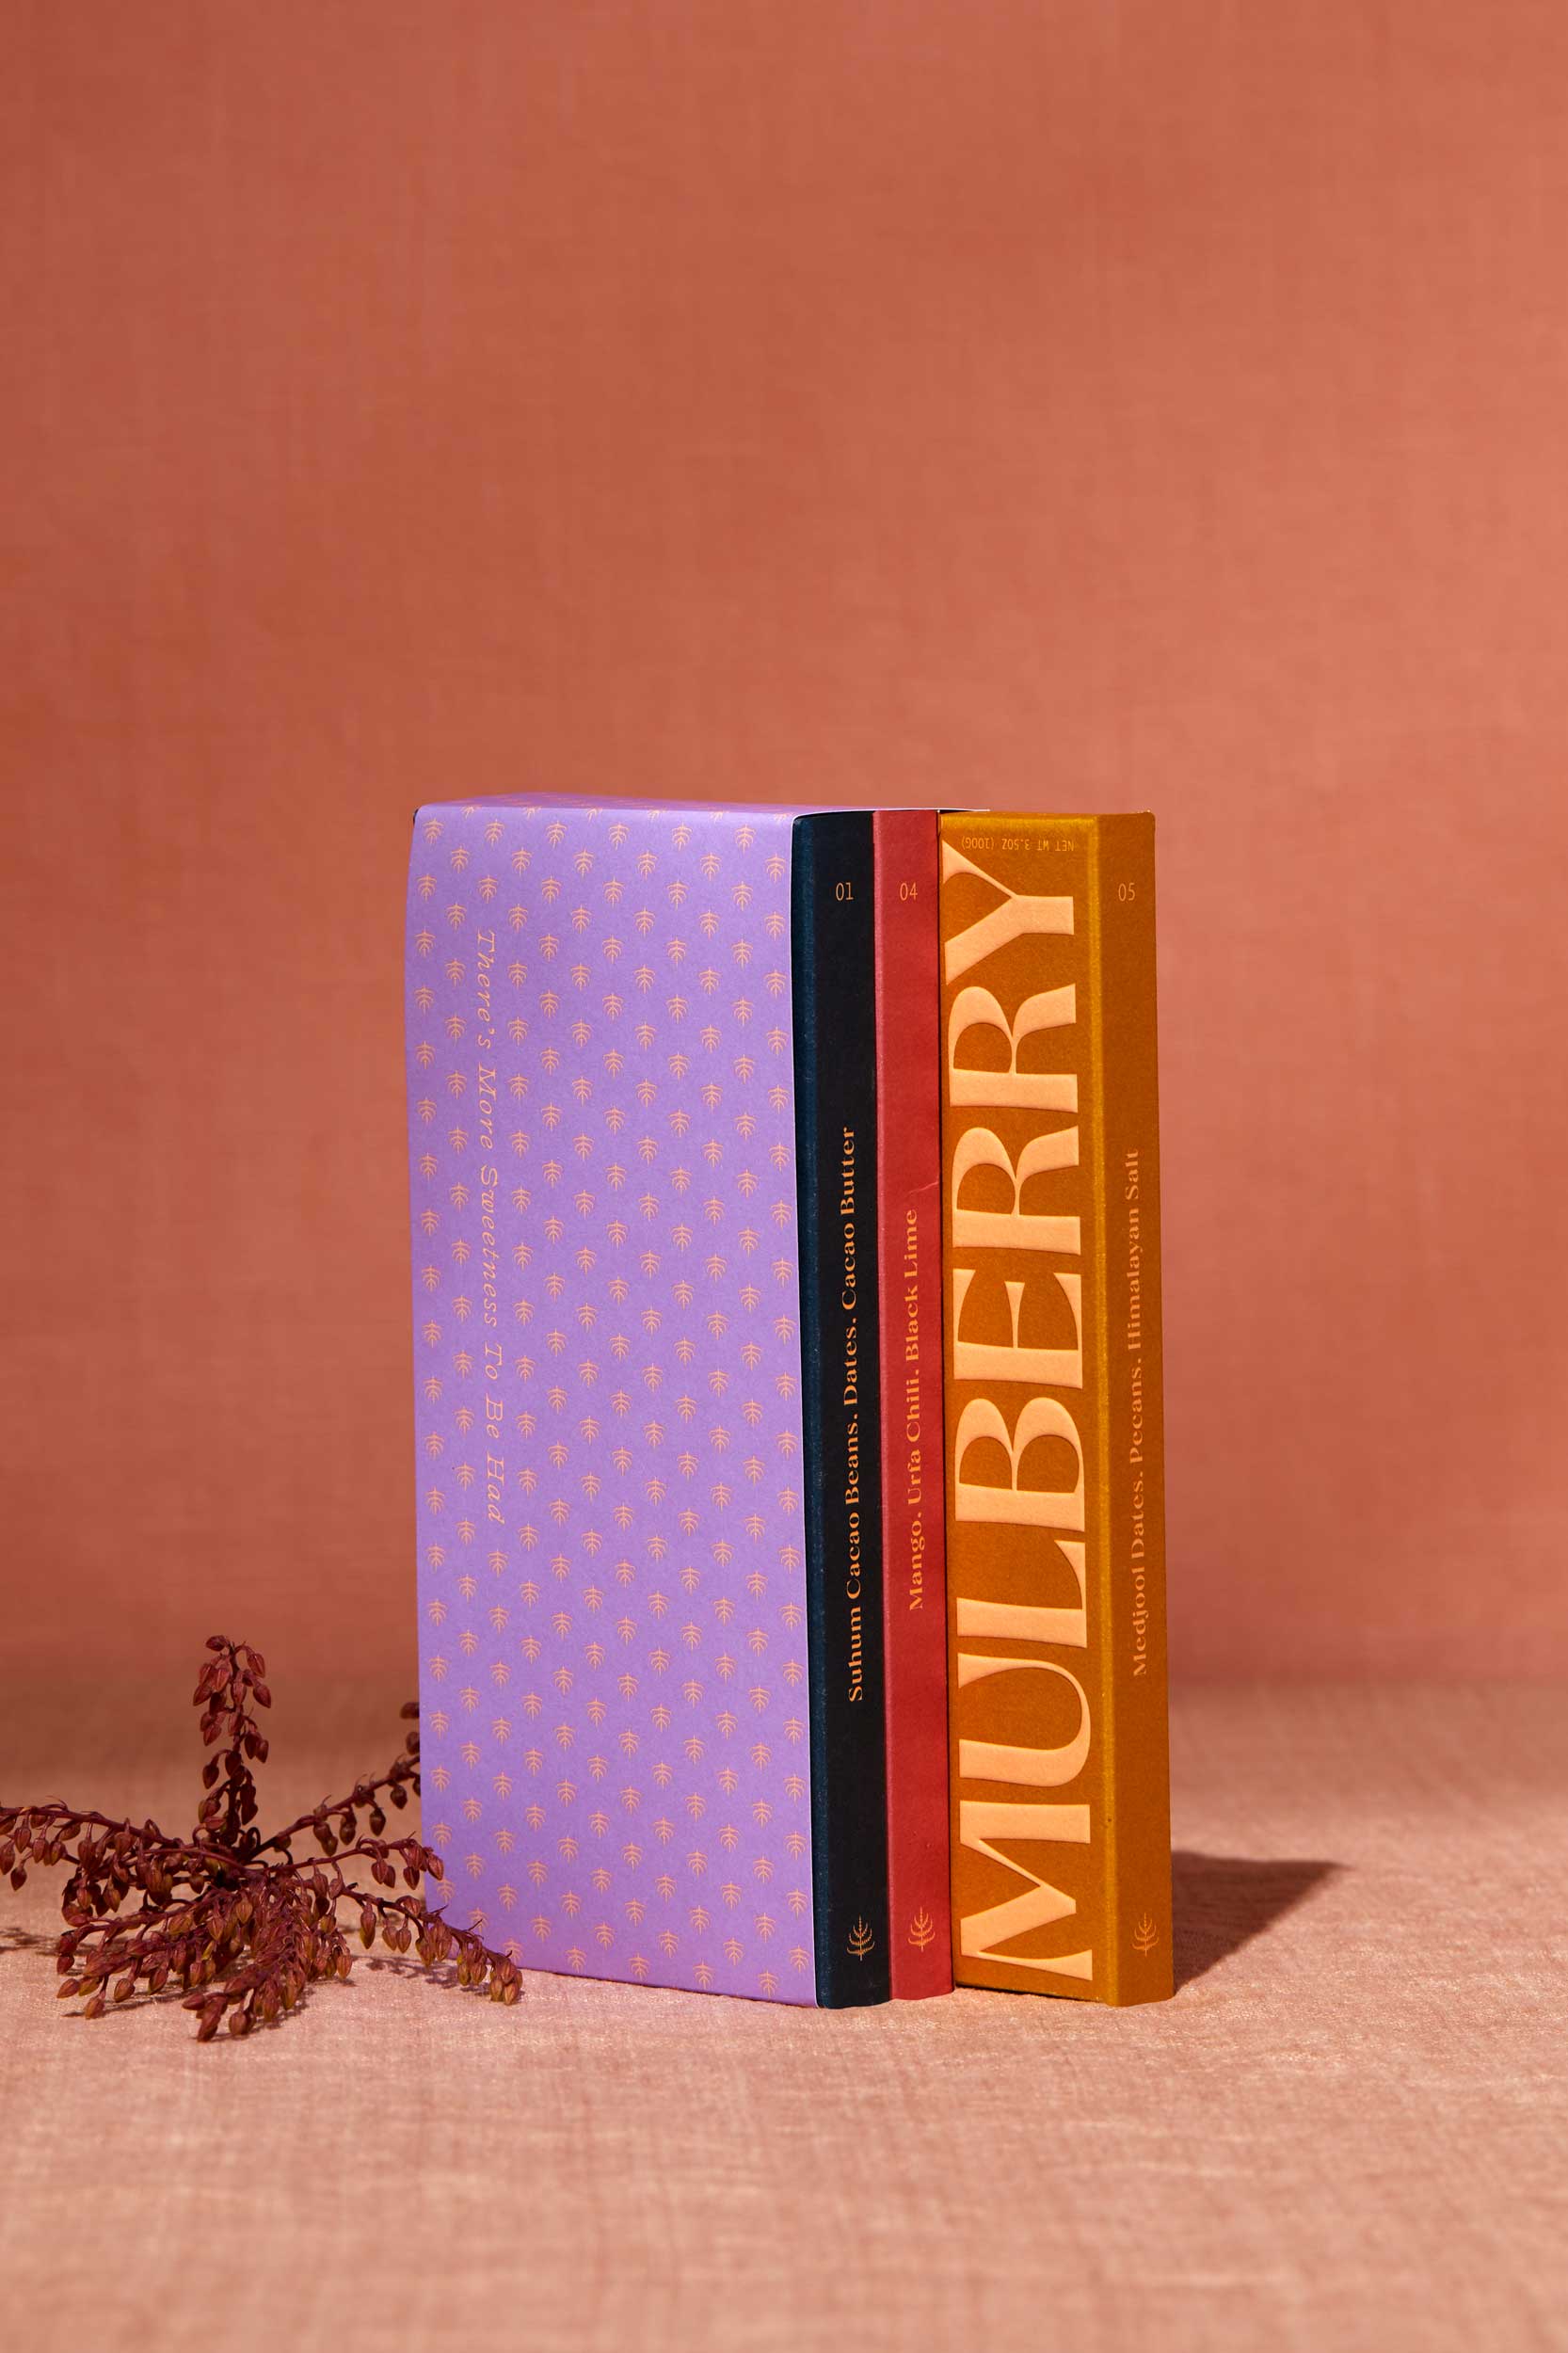 A gift set of 3 date sweetened chocolate bars with no added sugar stands on a peach linen backdrop. To the left of the gift set is a delicate flower. The gift set resembles a library set of books and is wrapped in purple paper adorned with a mulberry motif. The 3 chocolate boxes include: Pure Dark in a navy box; Mango, Urfa Chili, Black Lime in a rose colored box; and, Medjool Date, Pecan, Himalayan Salt in a mustard box.